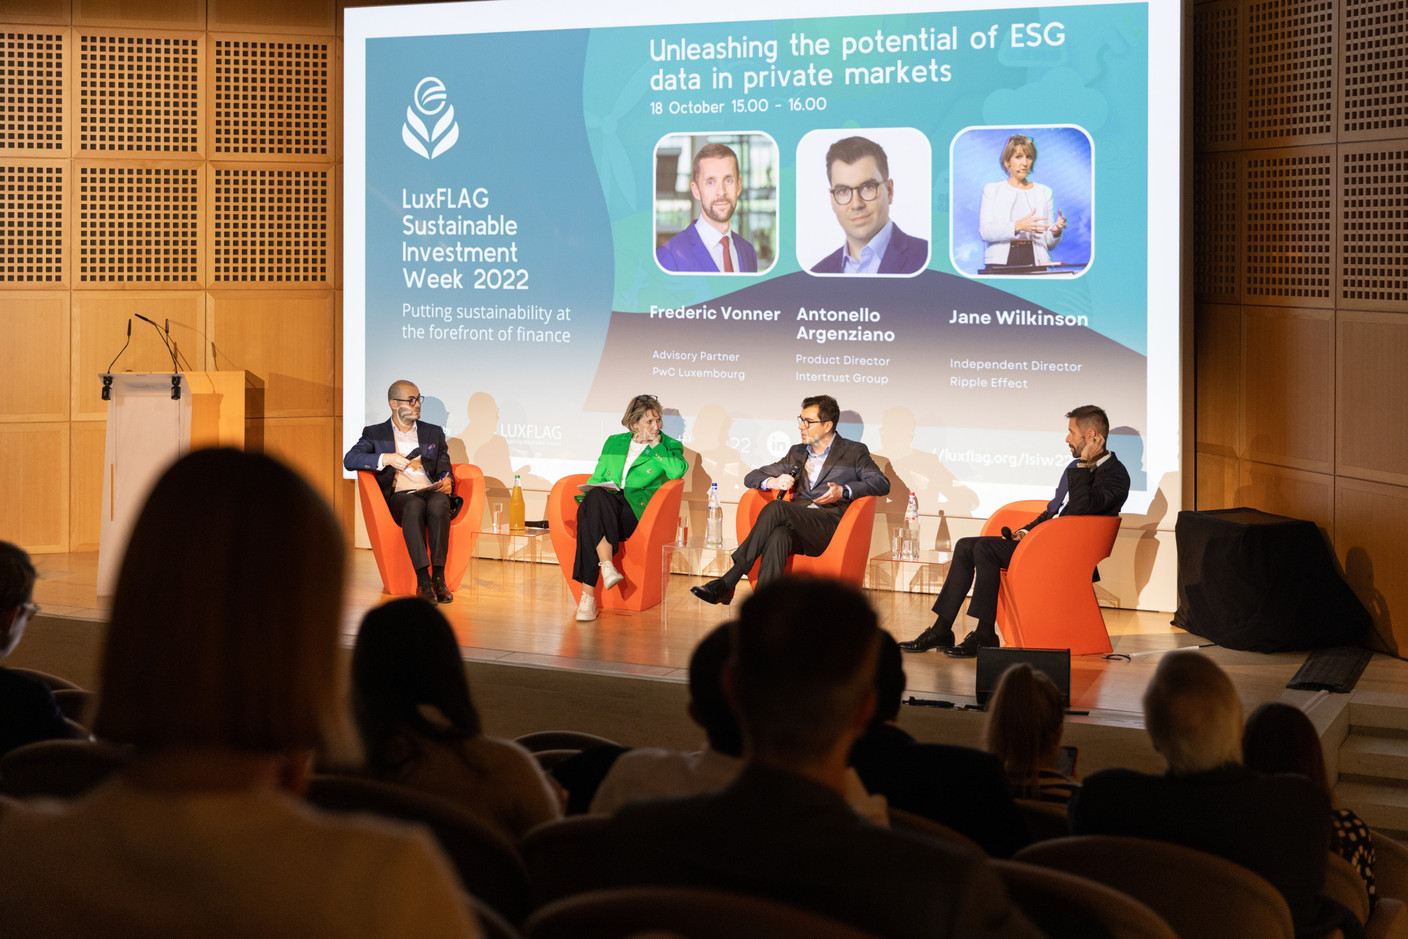 Jane Wilkinson of Ripple Effect (second from left), Antonello Argenziano of Intertrust Group (second from right) and Frédéric Vonner of PWC (on right) are seen during Luxflag Sustainable Investment Week 2022, 18 October 2022. Photo: Romain Gamba/Maison Moderne